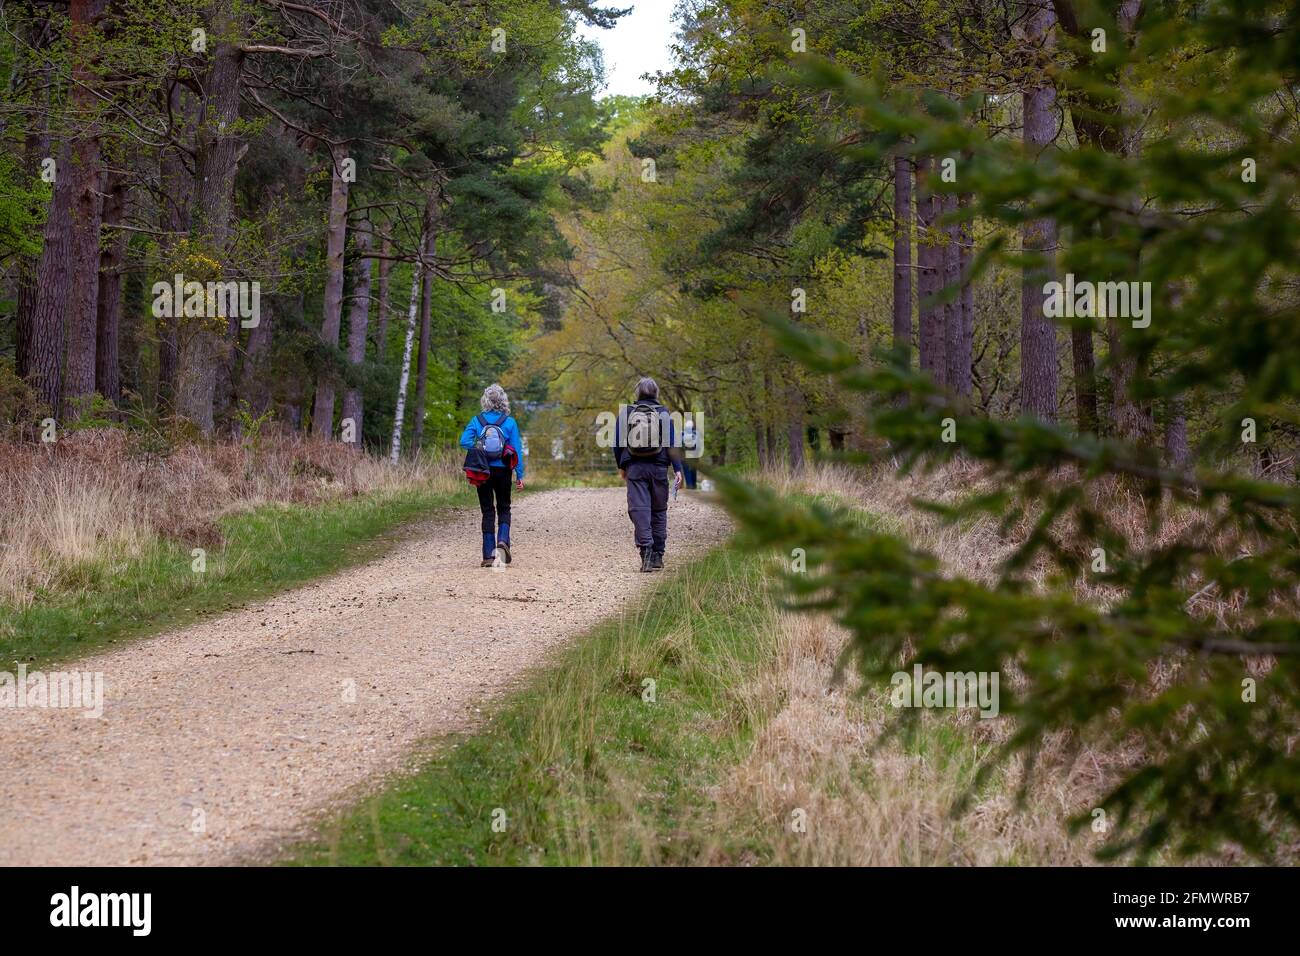 A retirement age couple hiking through the new forest on a track Stock Photo